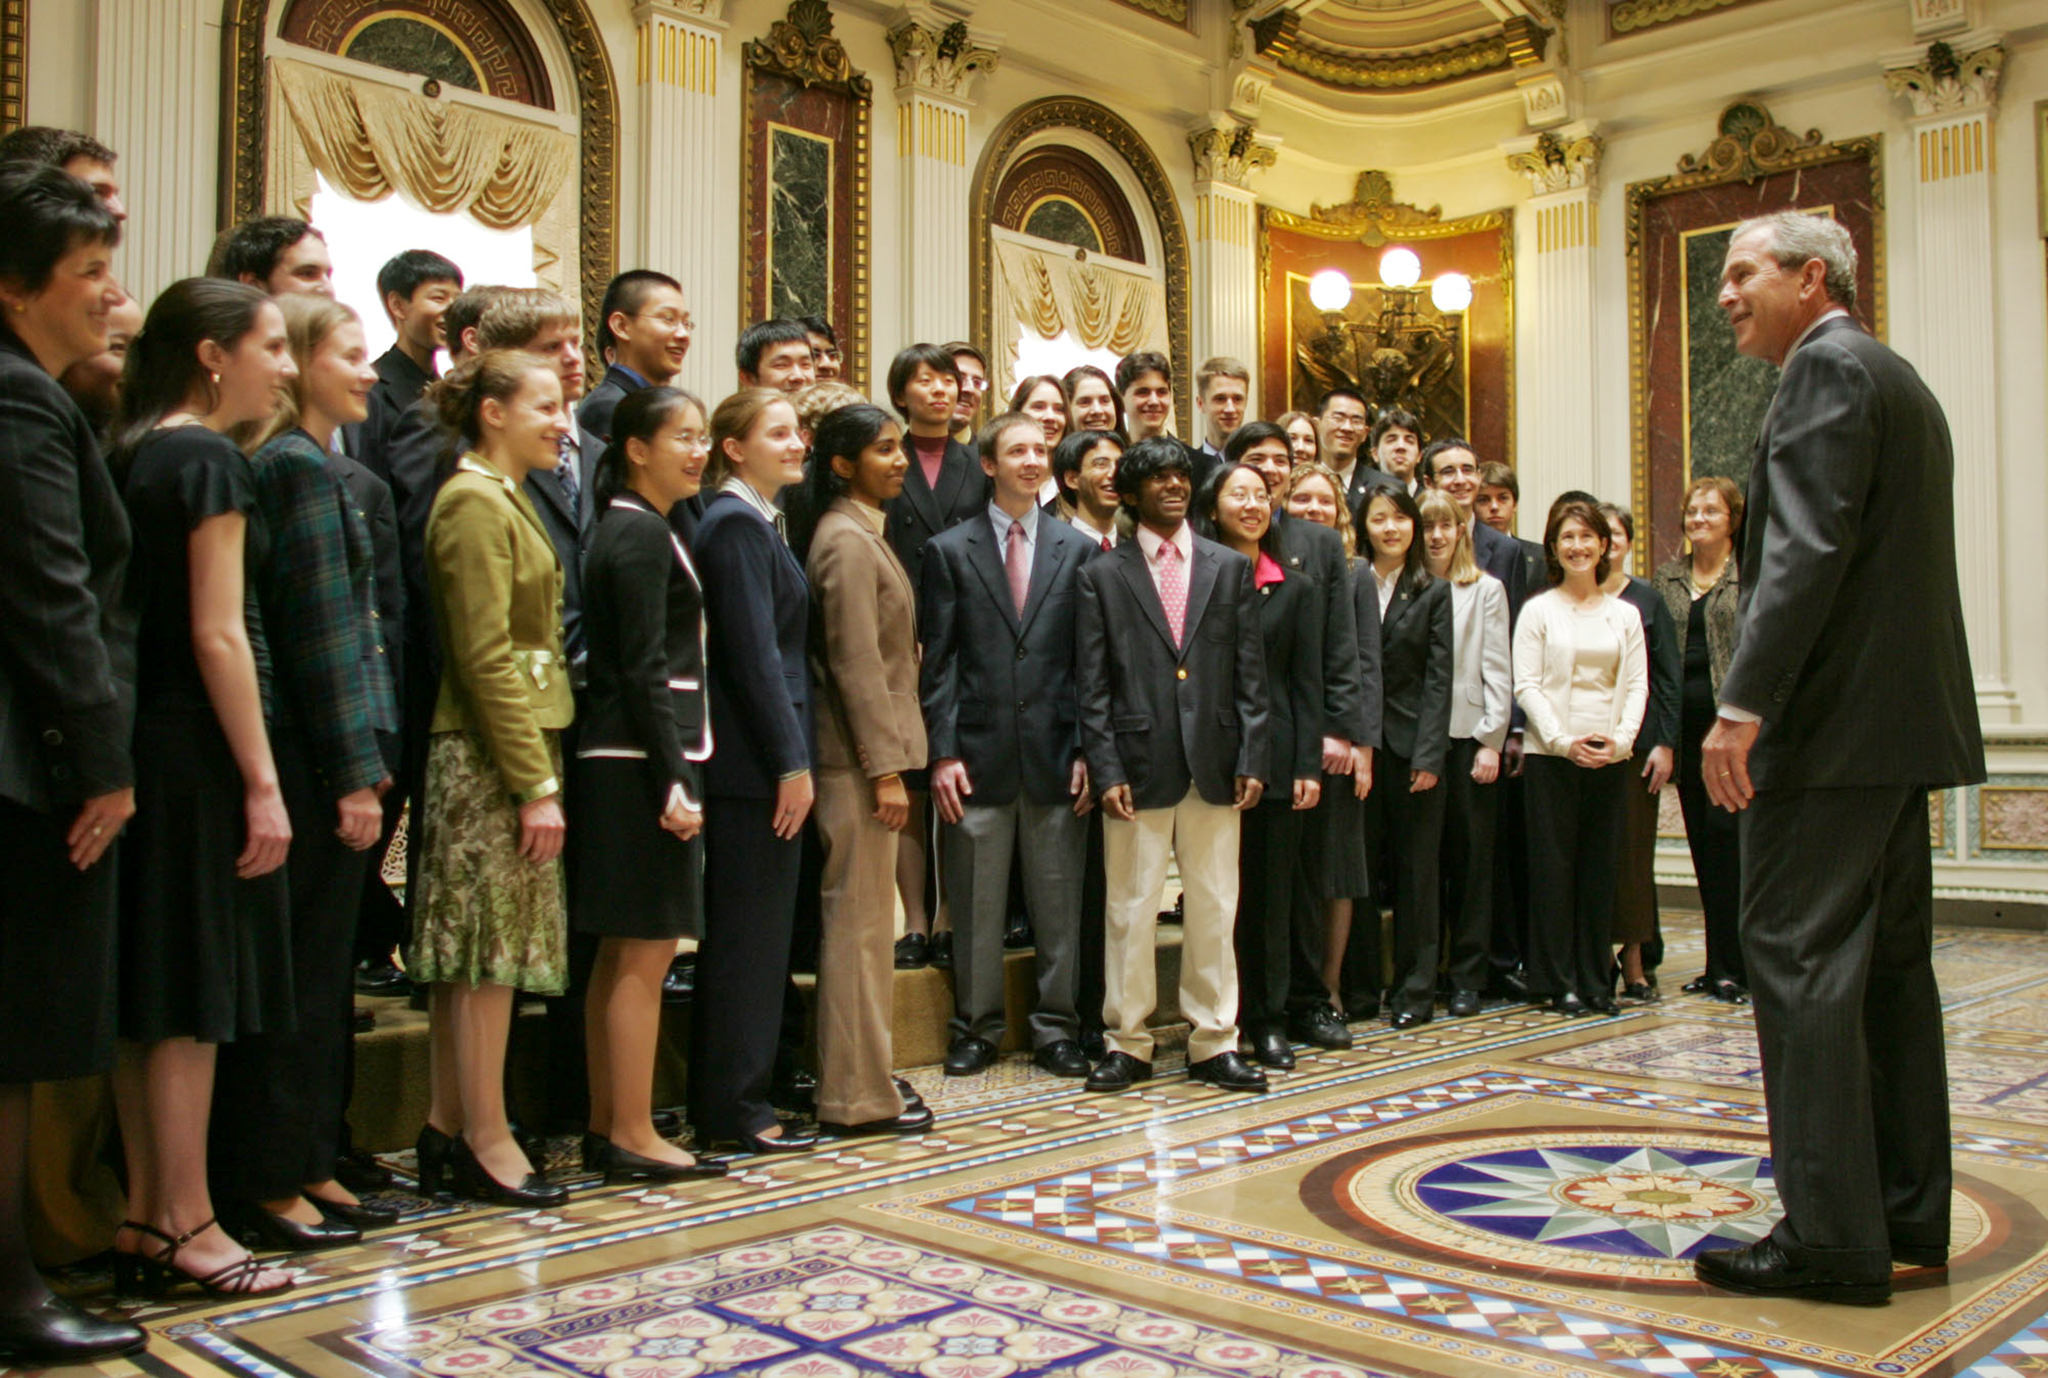 President George W. Bush meets with STS finalists in Washington